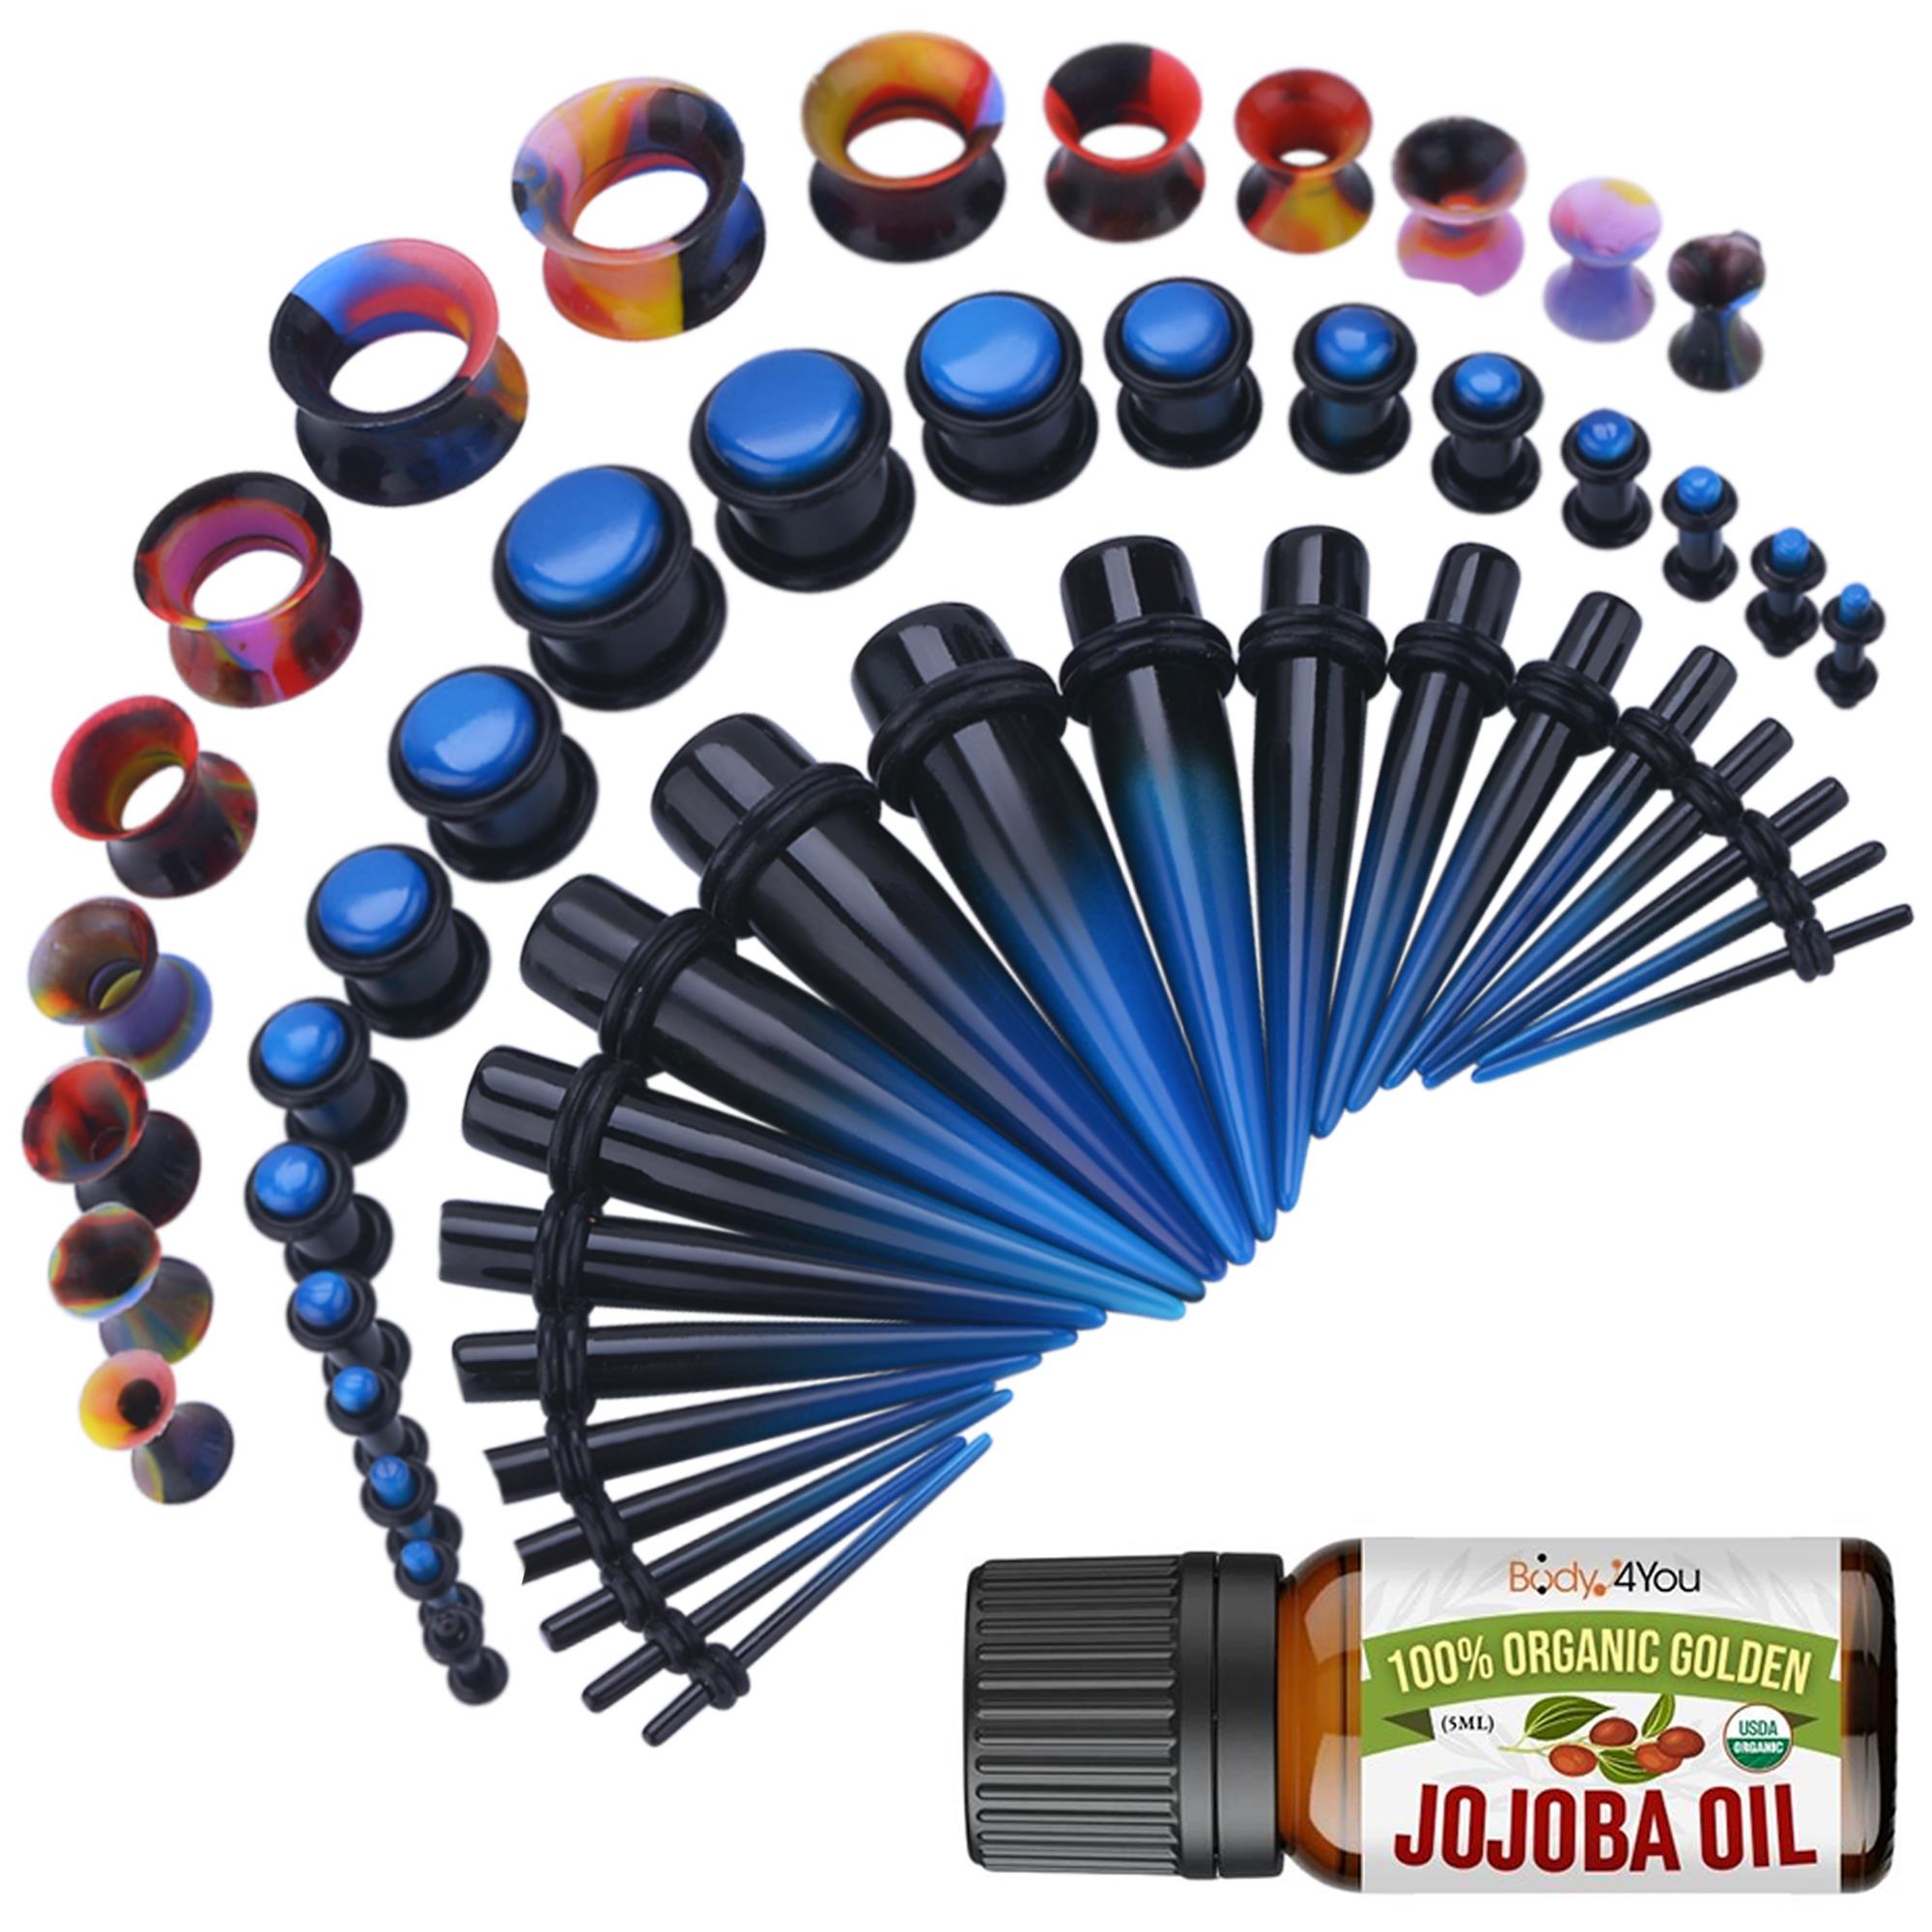 BodyJ4You 54PC Ear Stretching Kit 14G-12mm - Aftercare Jojoba Oil - Black Blue Acrylic Plugs Gauge Tapers Silicone Tunnels - Lightweight Expanders Men Women - image 1 of 10